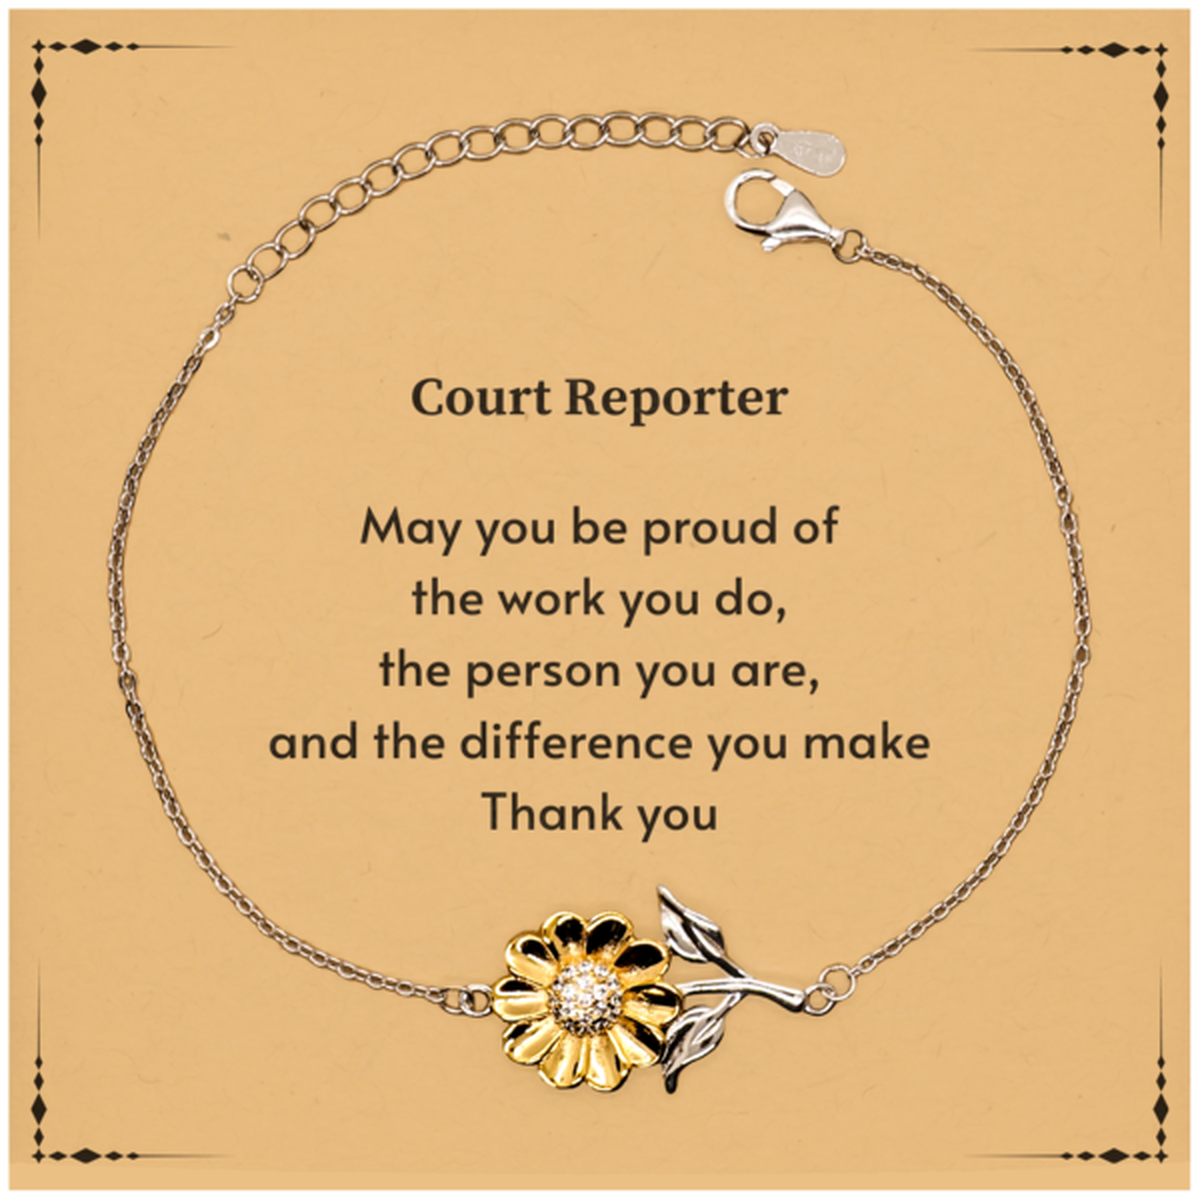 Heartwarming Sunflower Bracelet Retirement Coworkers Gifts for Court Reporter, Court Reporter May You be proud of the work you do, the person you are Gifts for Boss Men Women Friends